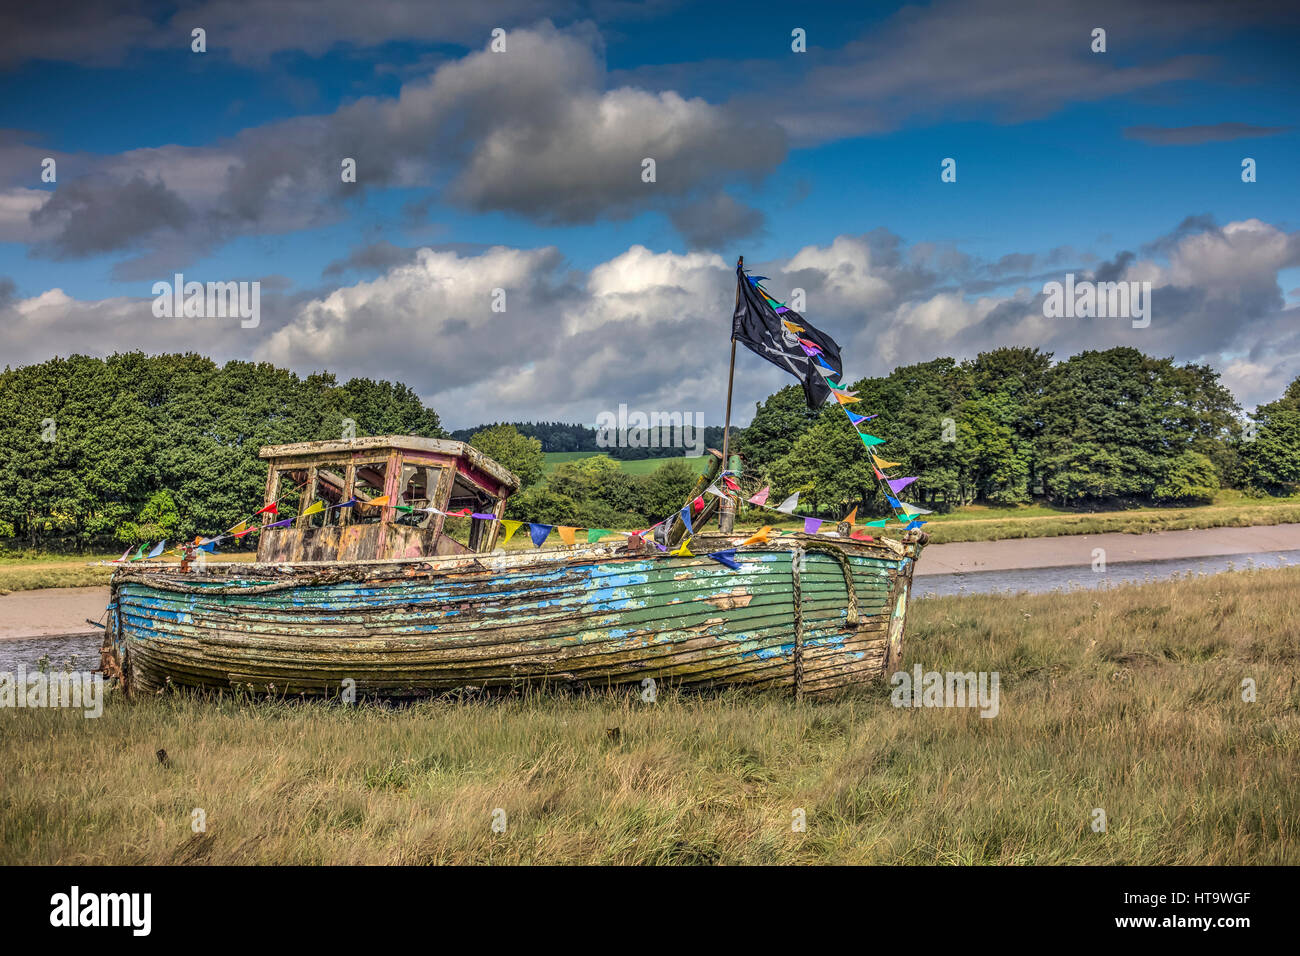 An old boat by the dee in Kirkcudbright decorated with bunting and a scull and crossbones pirate flag. Taken in Dumfries and Galloway, Scotland, UK. Stock Photo